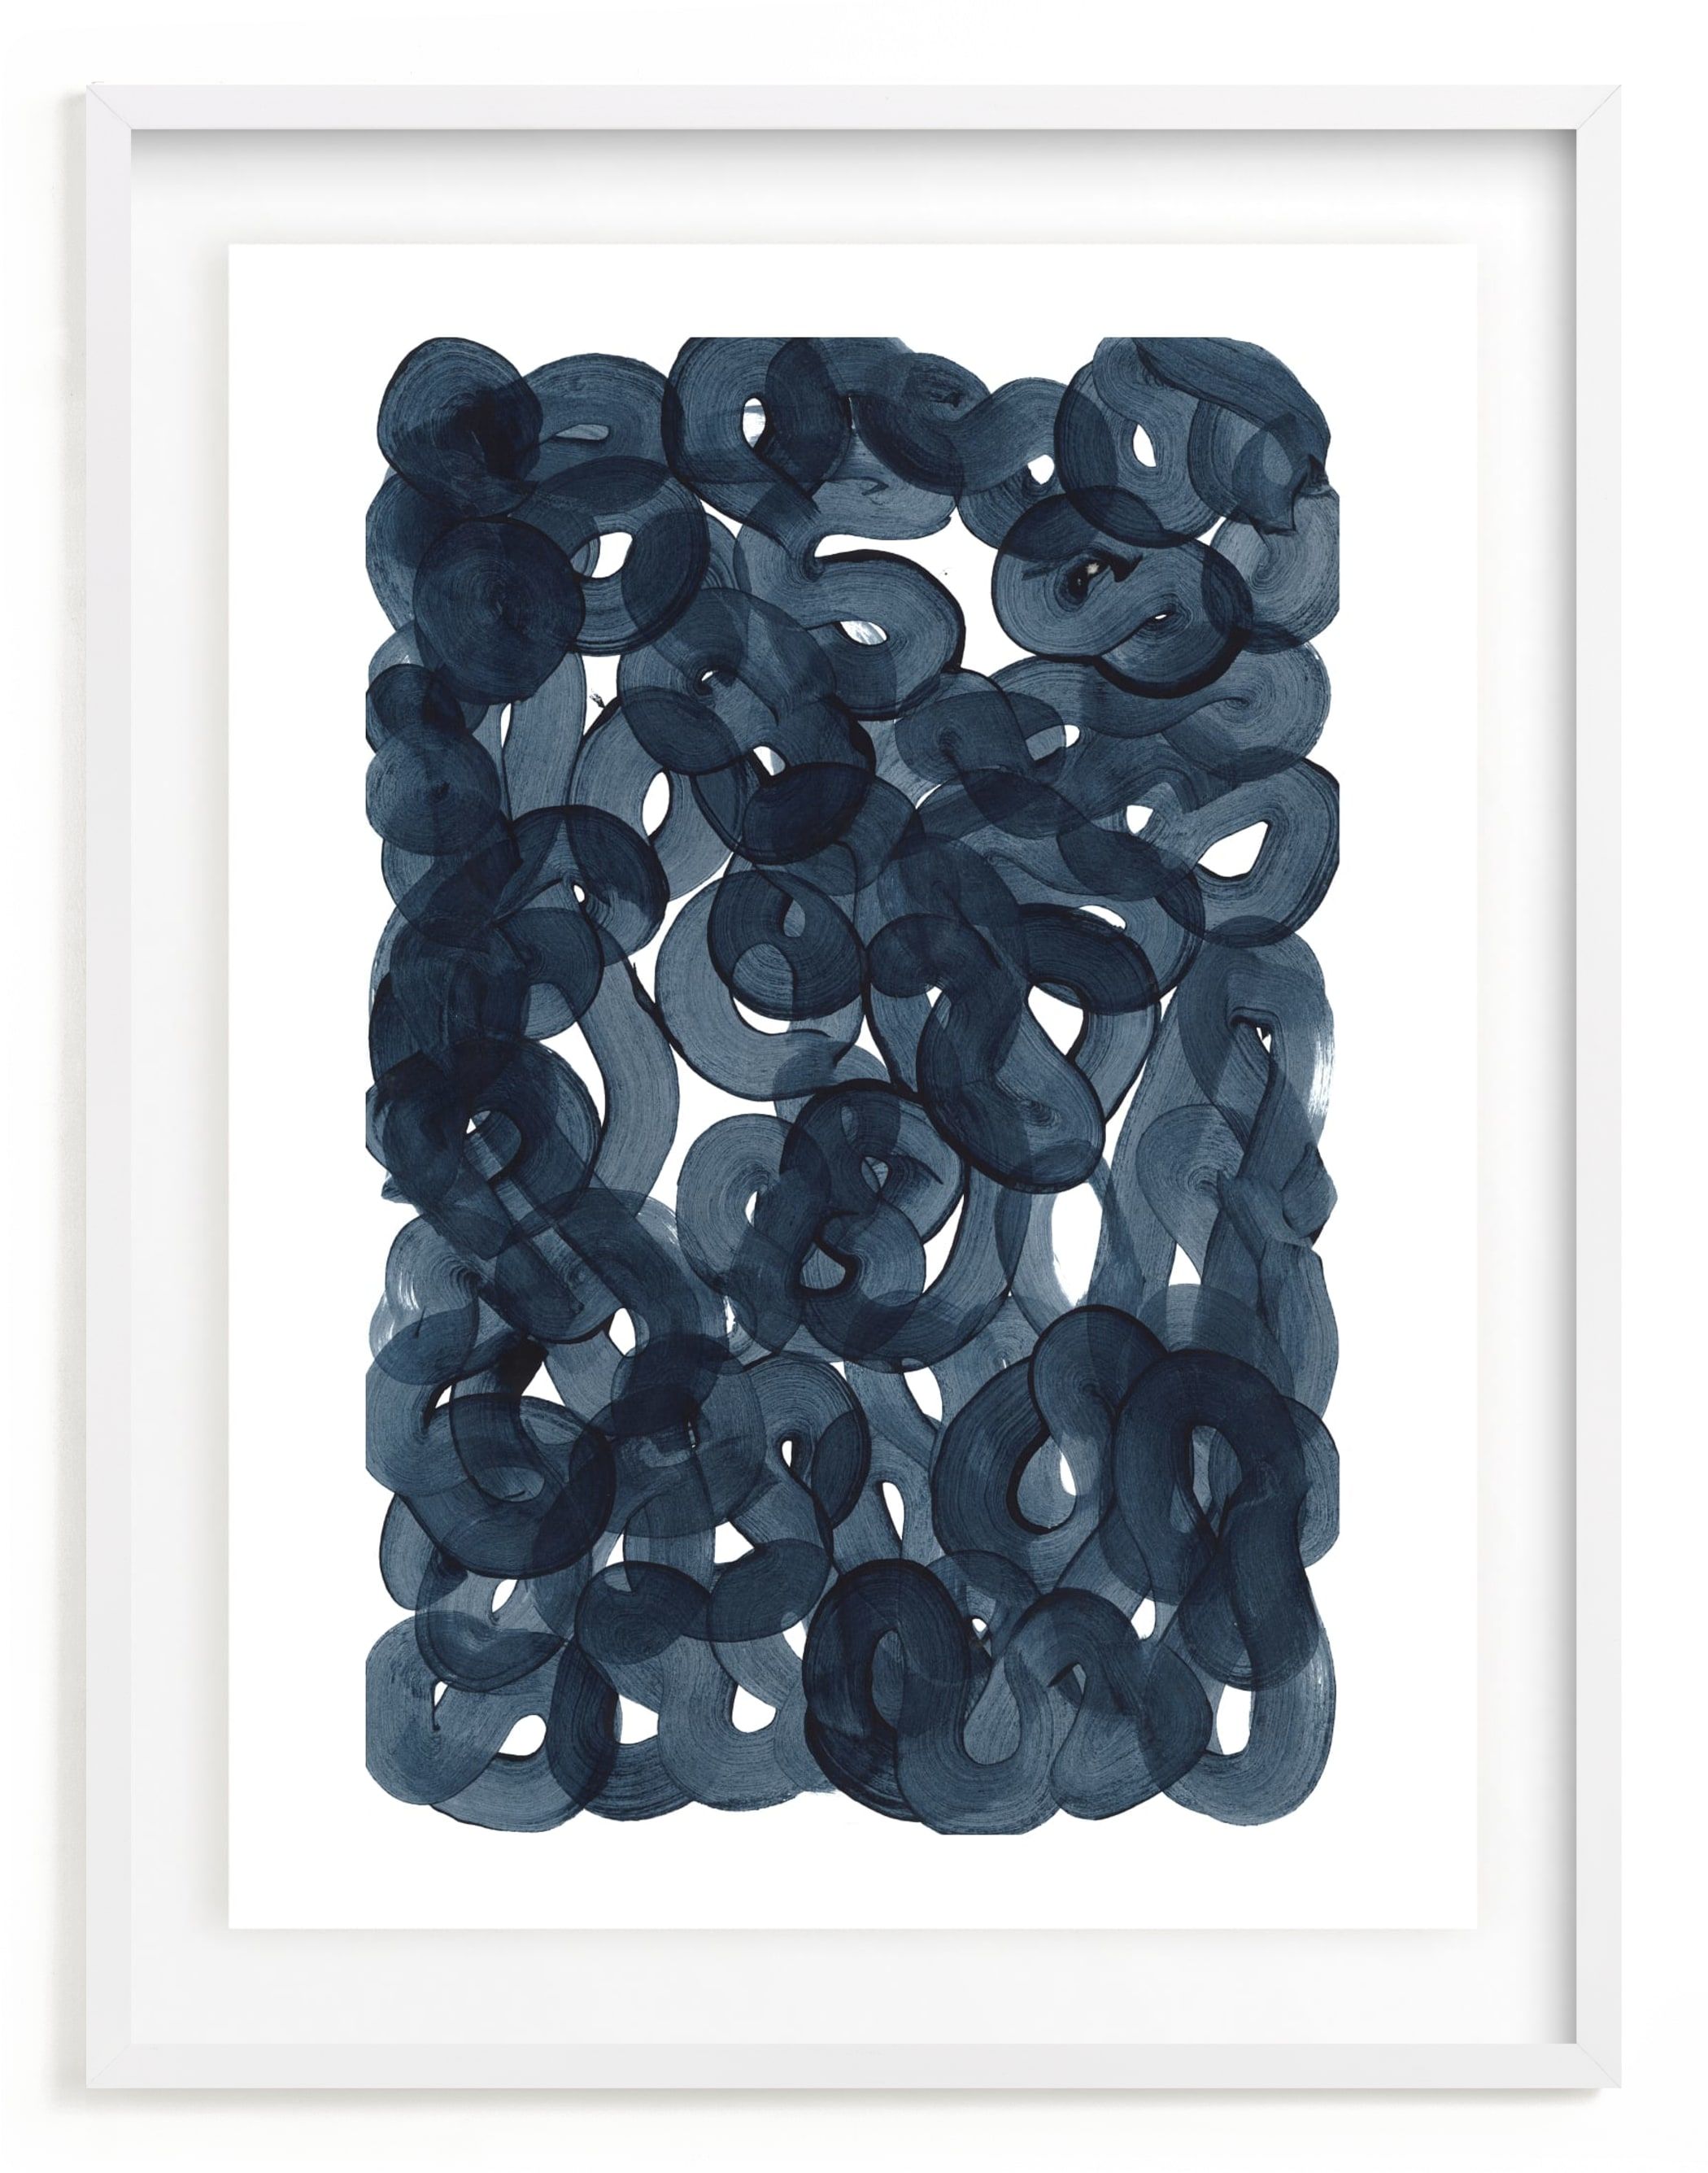 "Indigo Ink" - Painting Limited Edition Art Print by Erin McCluskey Wheeler. | Minted